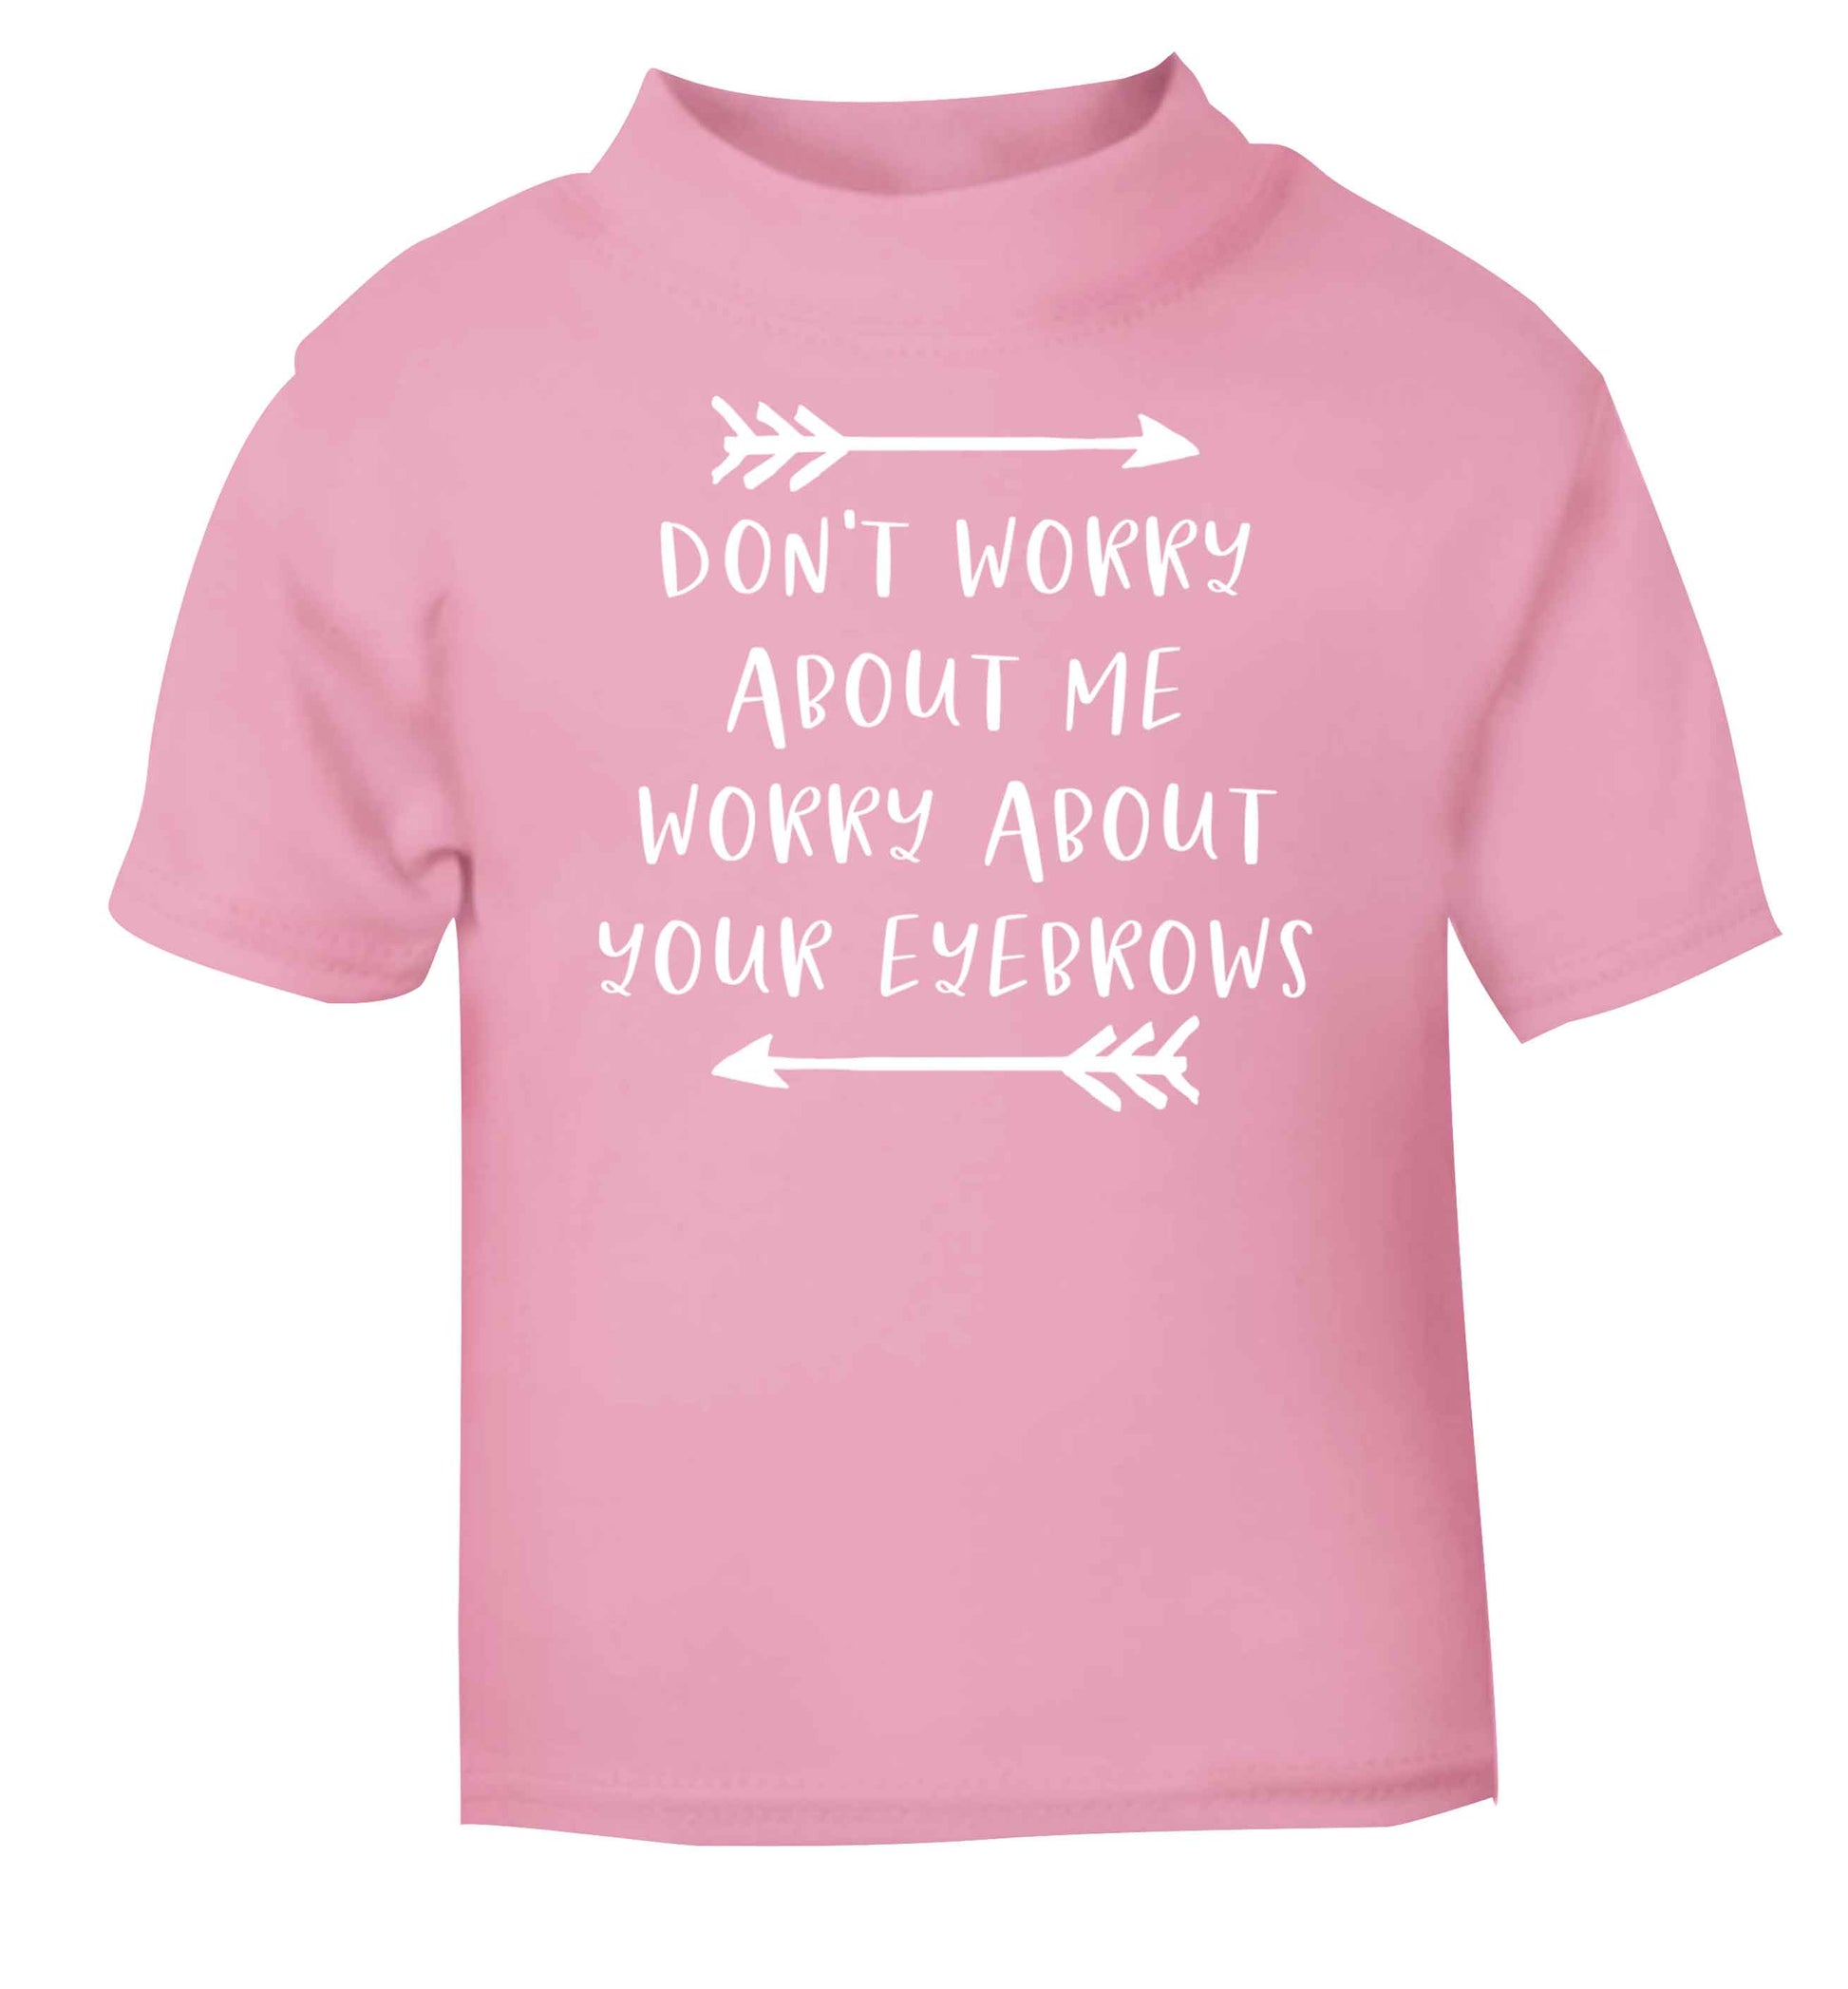 Don't worry about me worry about your eyebrows light pink baby toddler Tshirt 2 Years